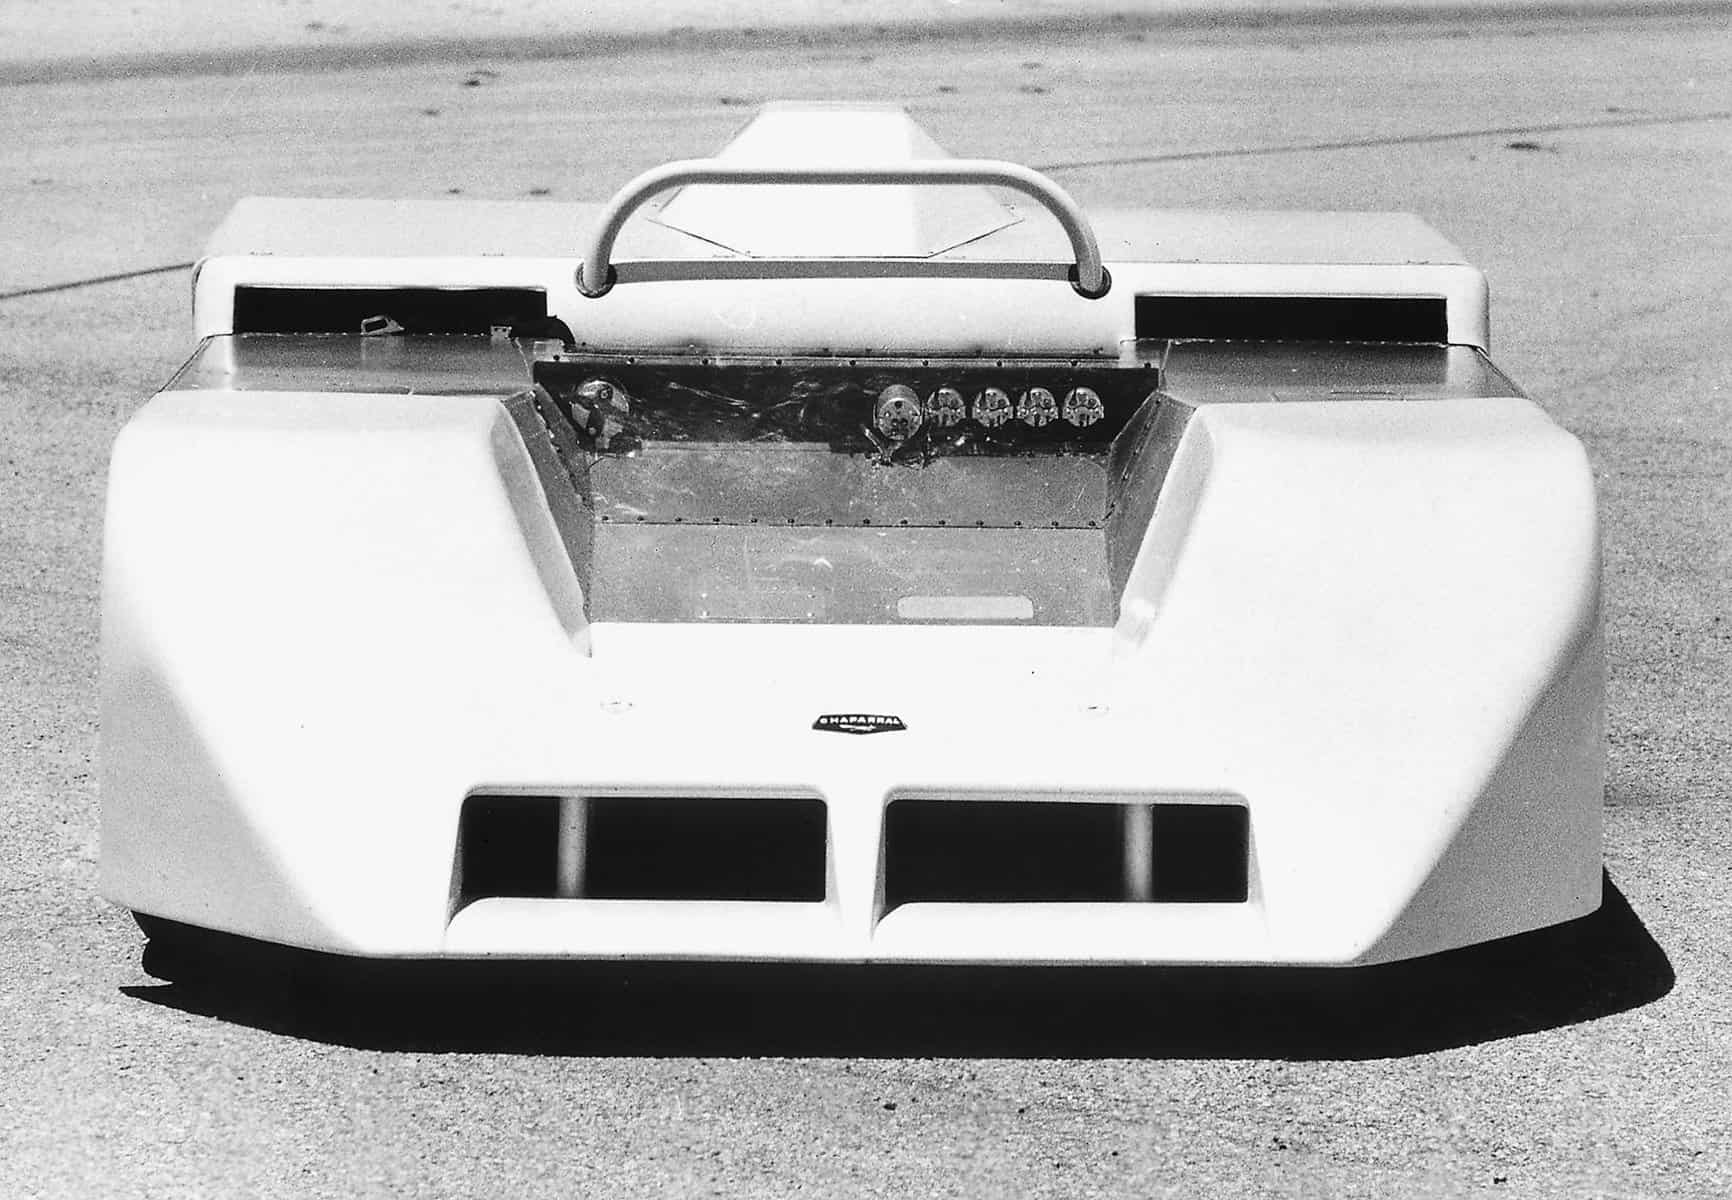 Jim Hall and the Chaparral 2J: The Story of America's Most Extreme Race Car